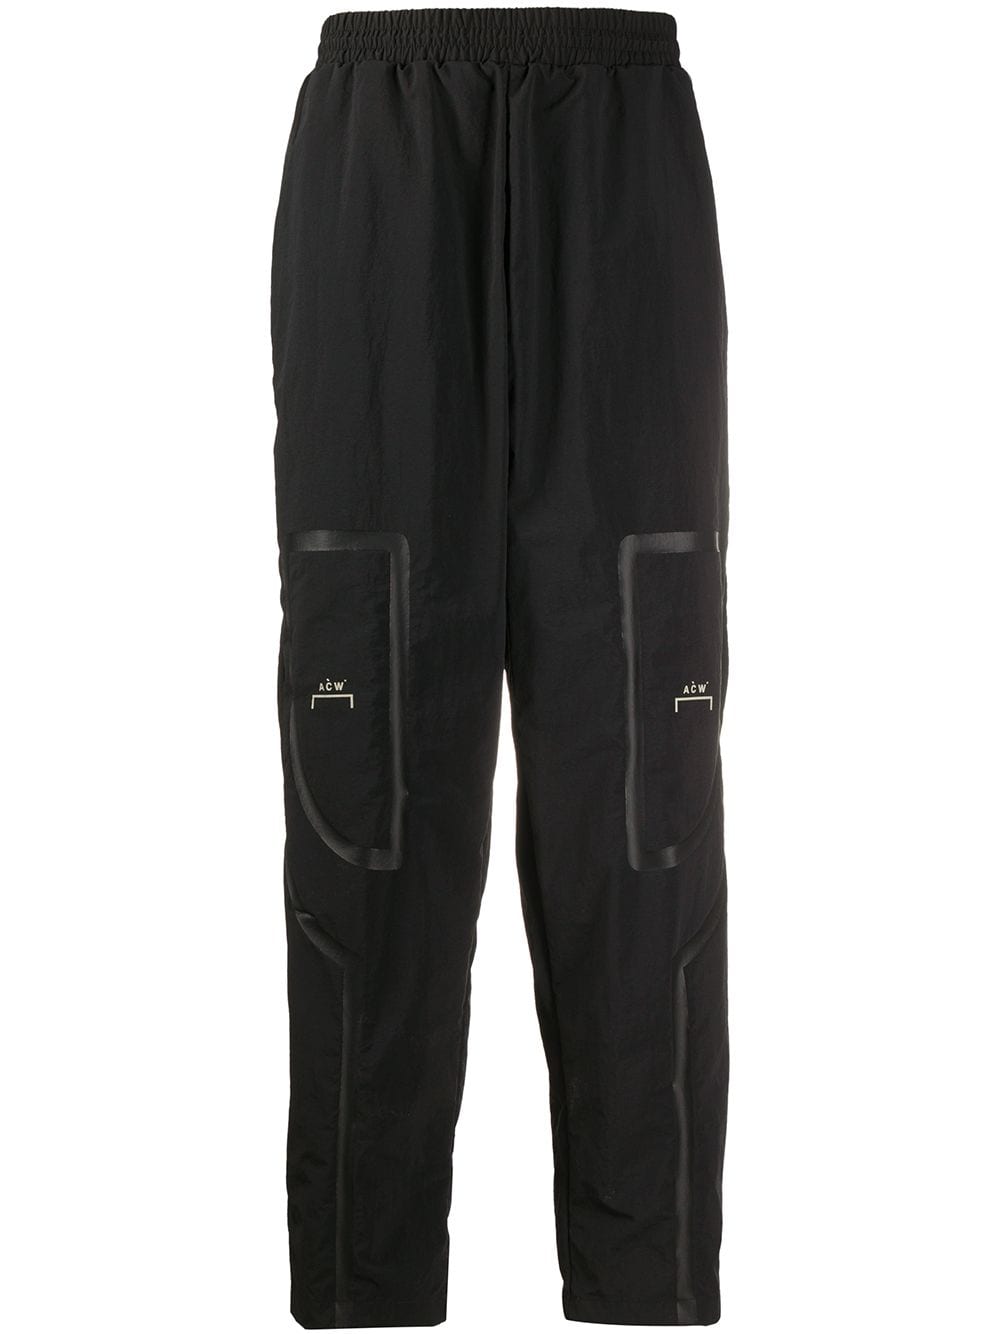 A-COLD-WALL* Bracket Taped joggers - Black von A-COLD-WALL*